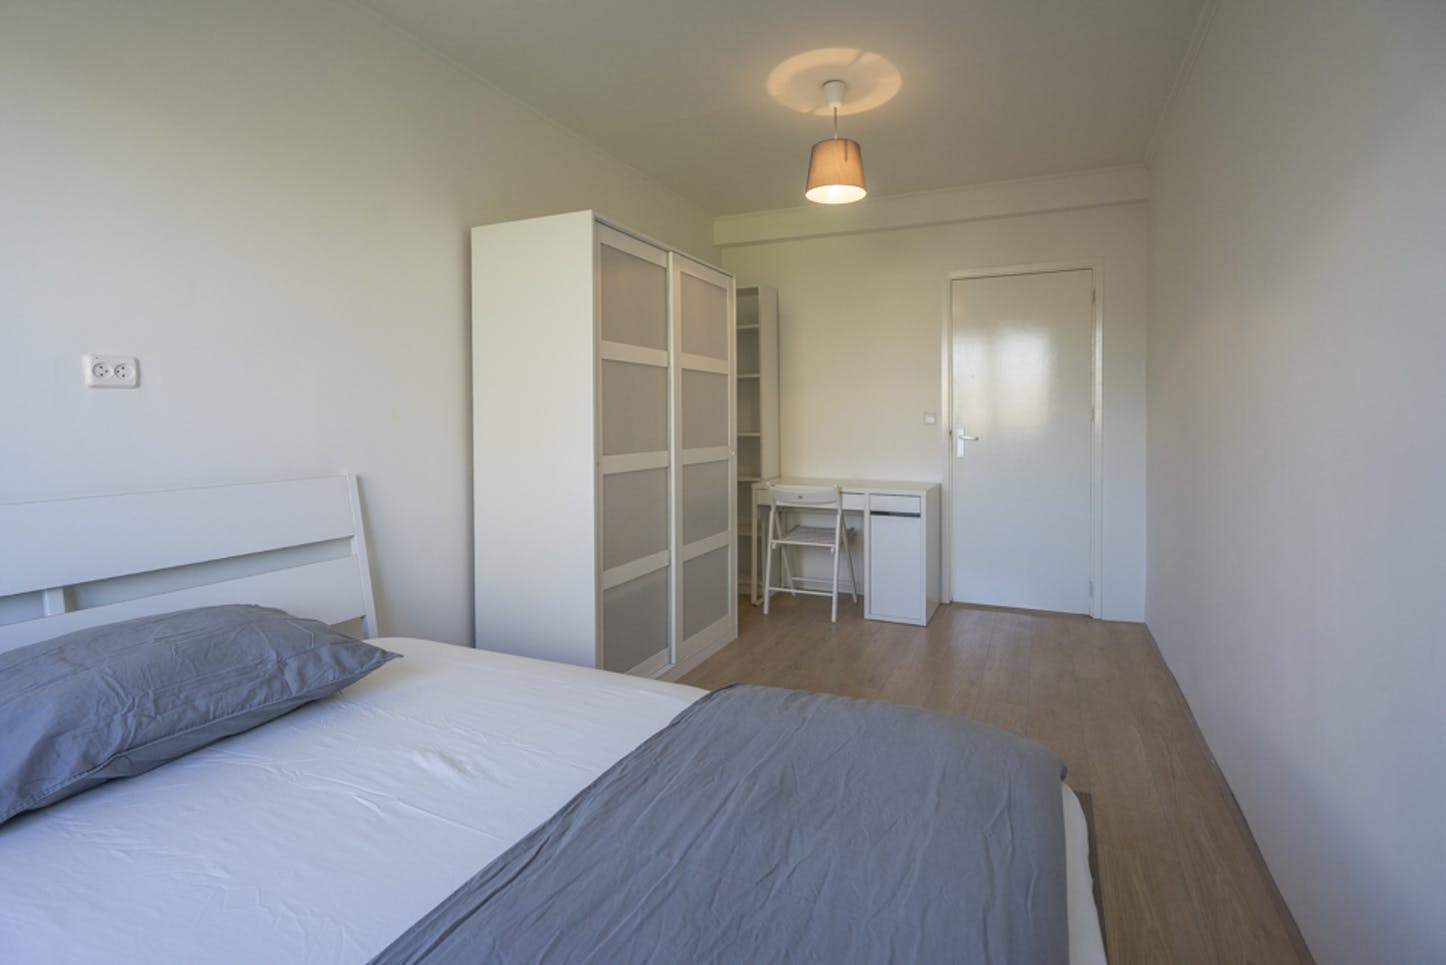 Botter - Private bedroom in Amsterdam for expats